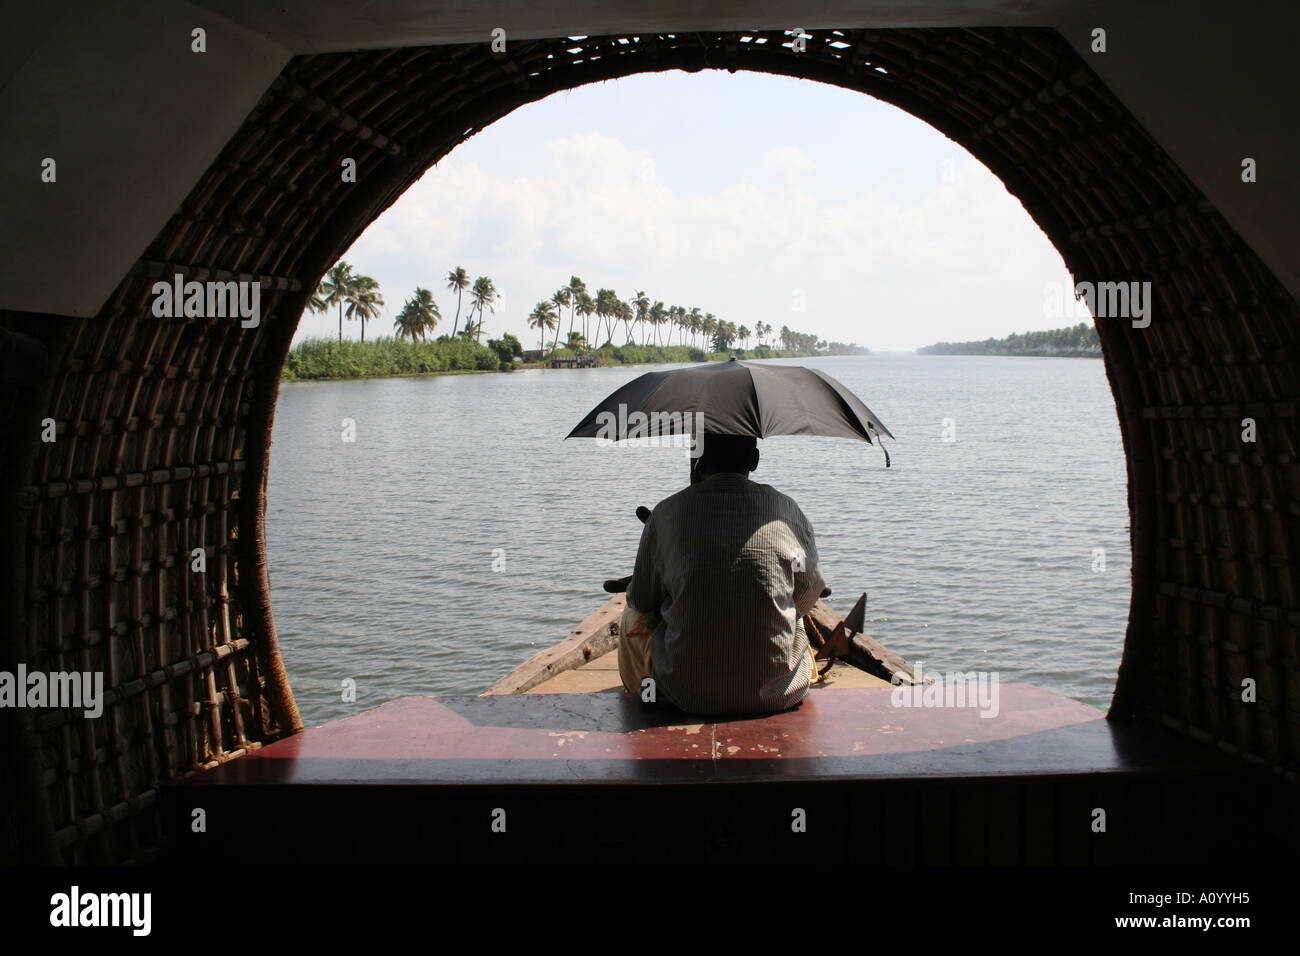 Man with umbrella steering a house boat on the backwaters of kerala in india Stock Photo